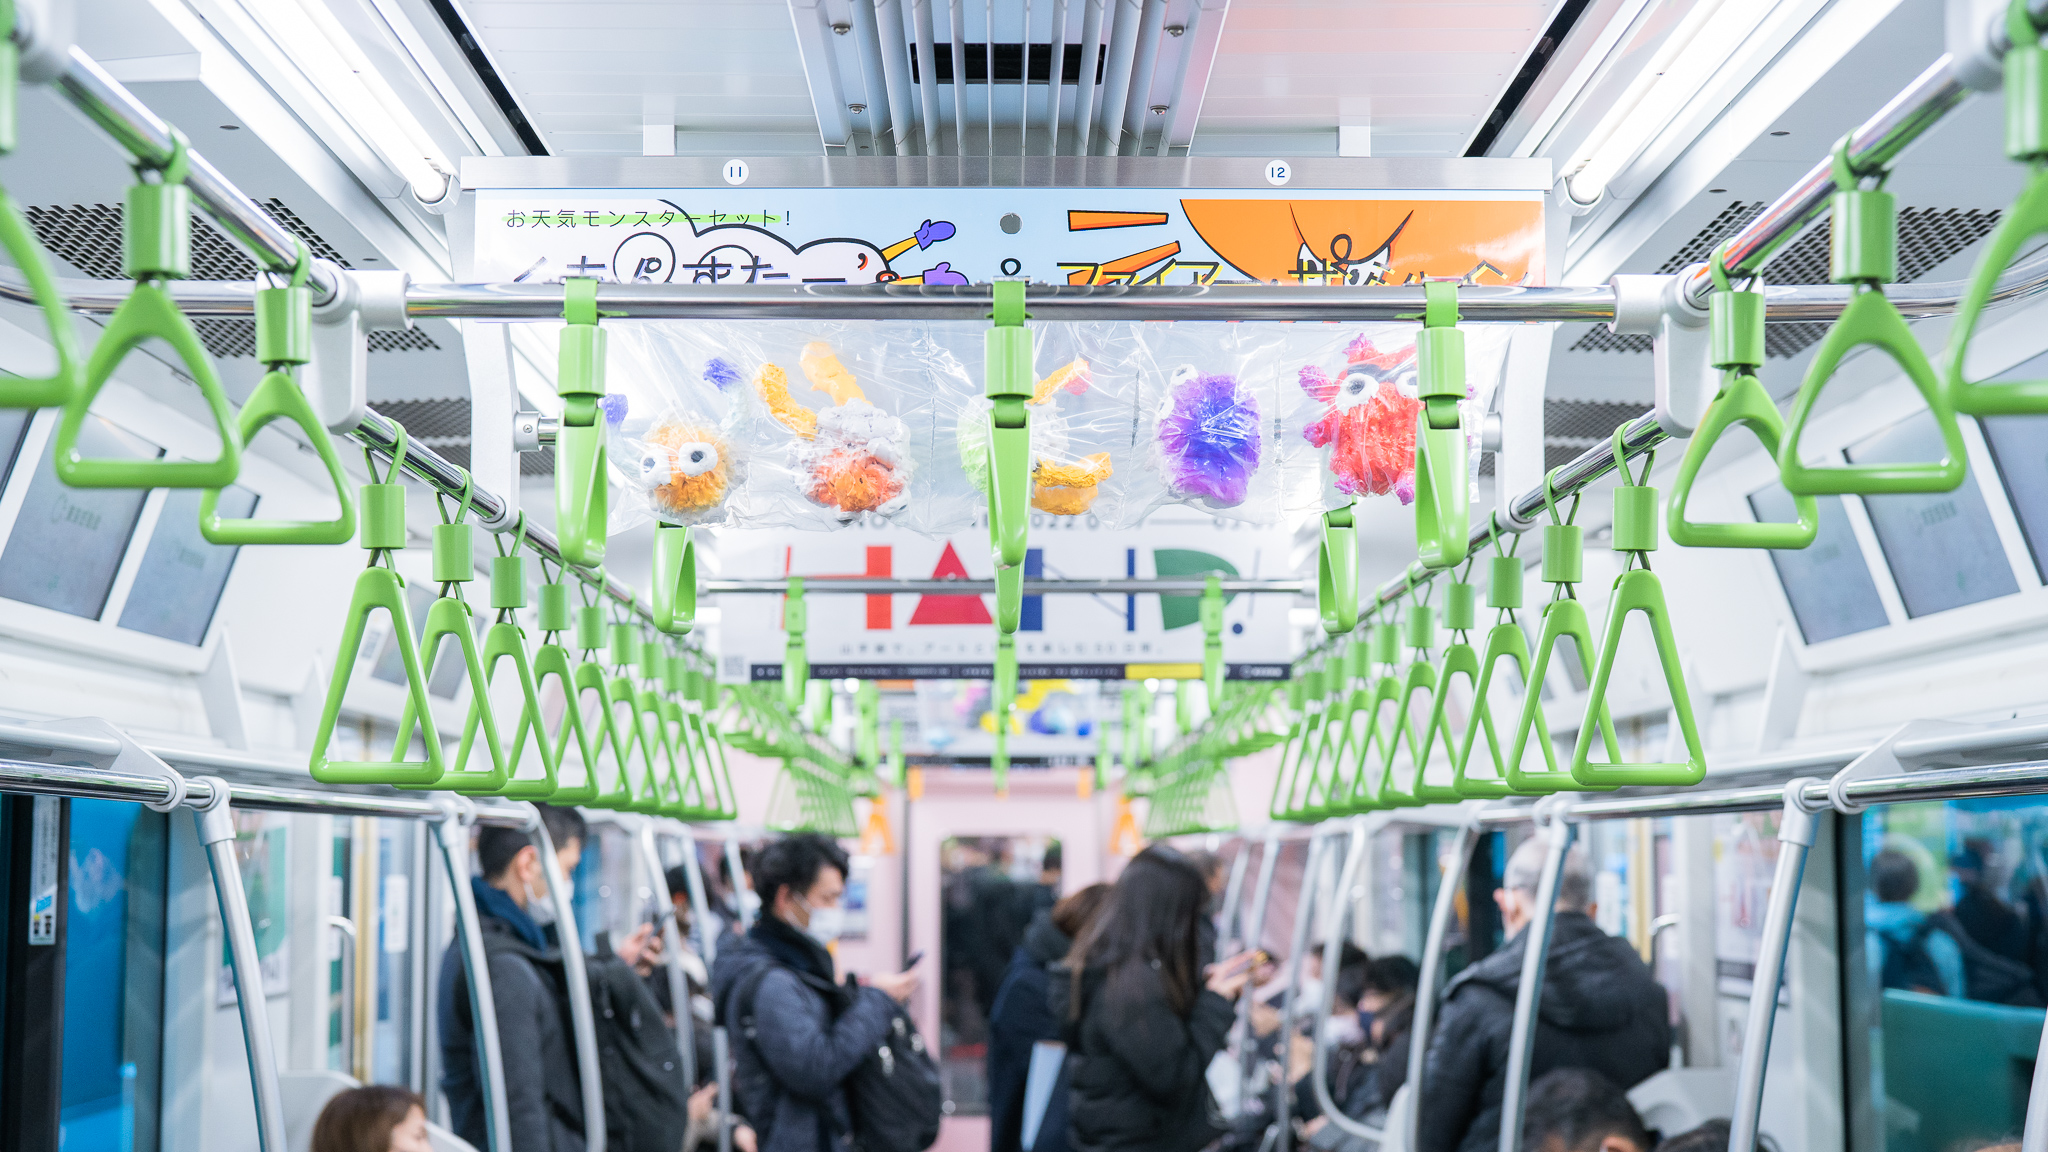 MELTedMEADOW YAMANOTE LINE MUSEUM